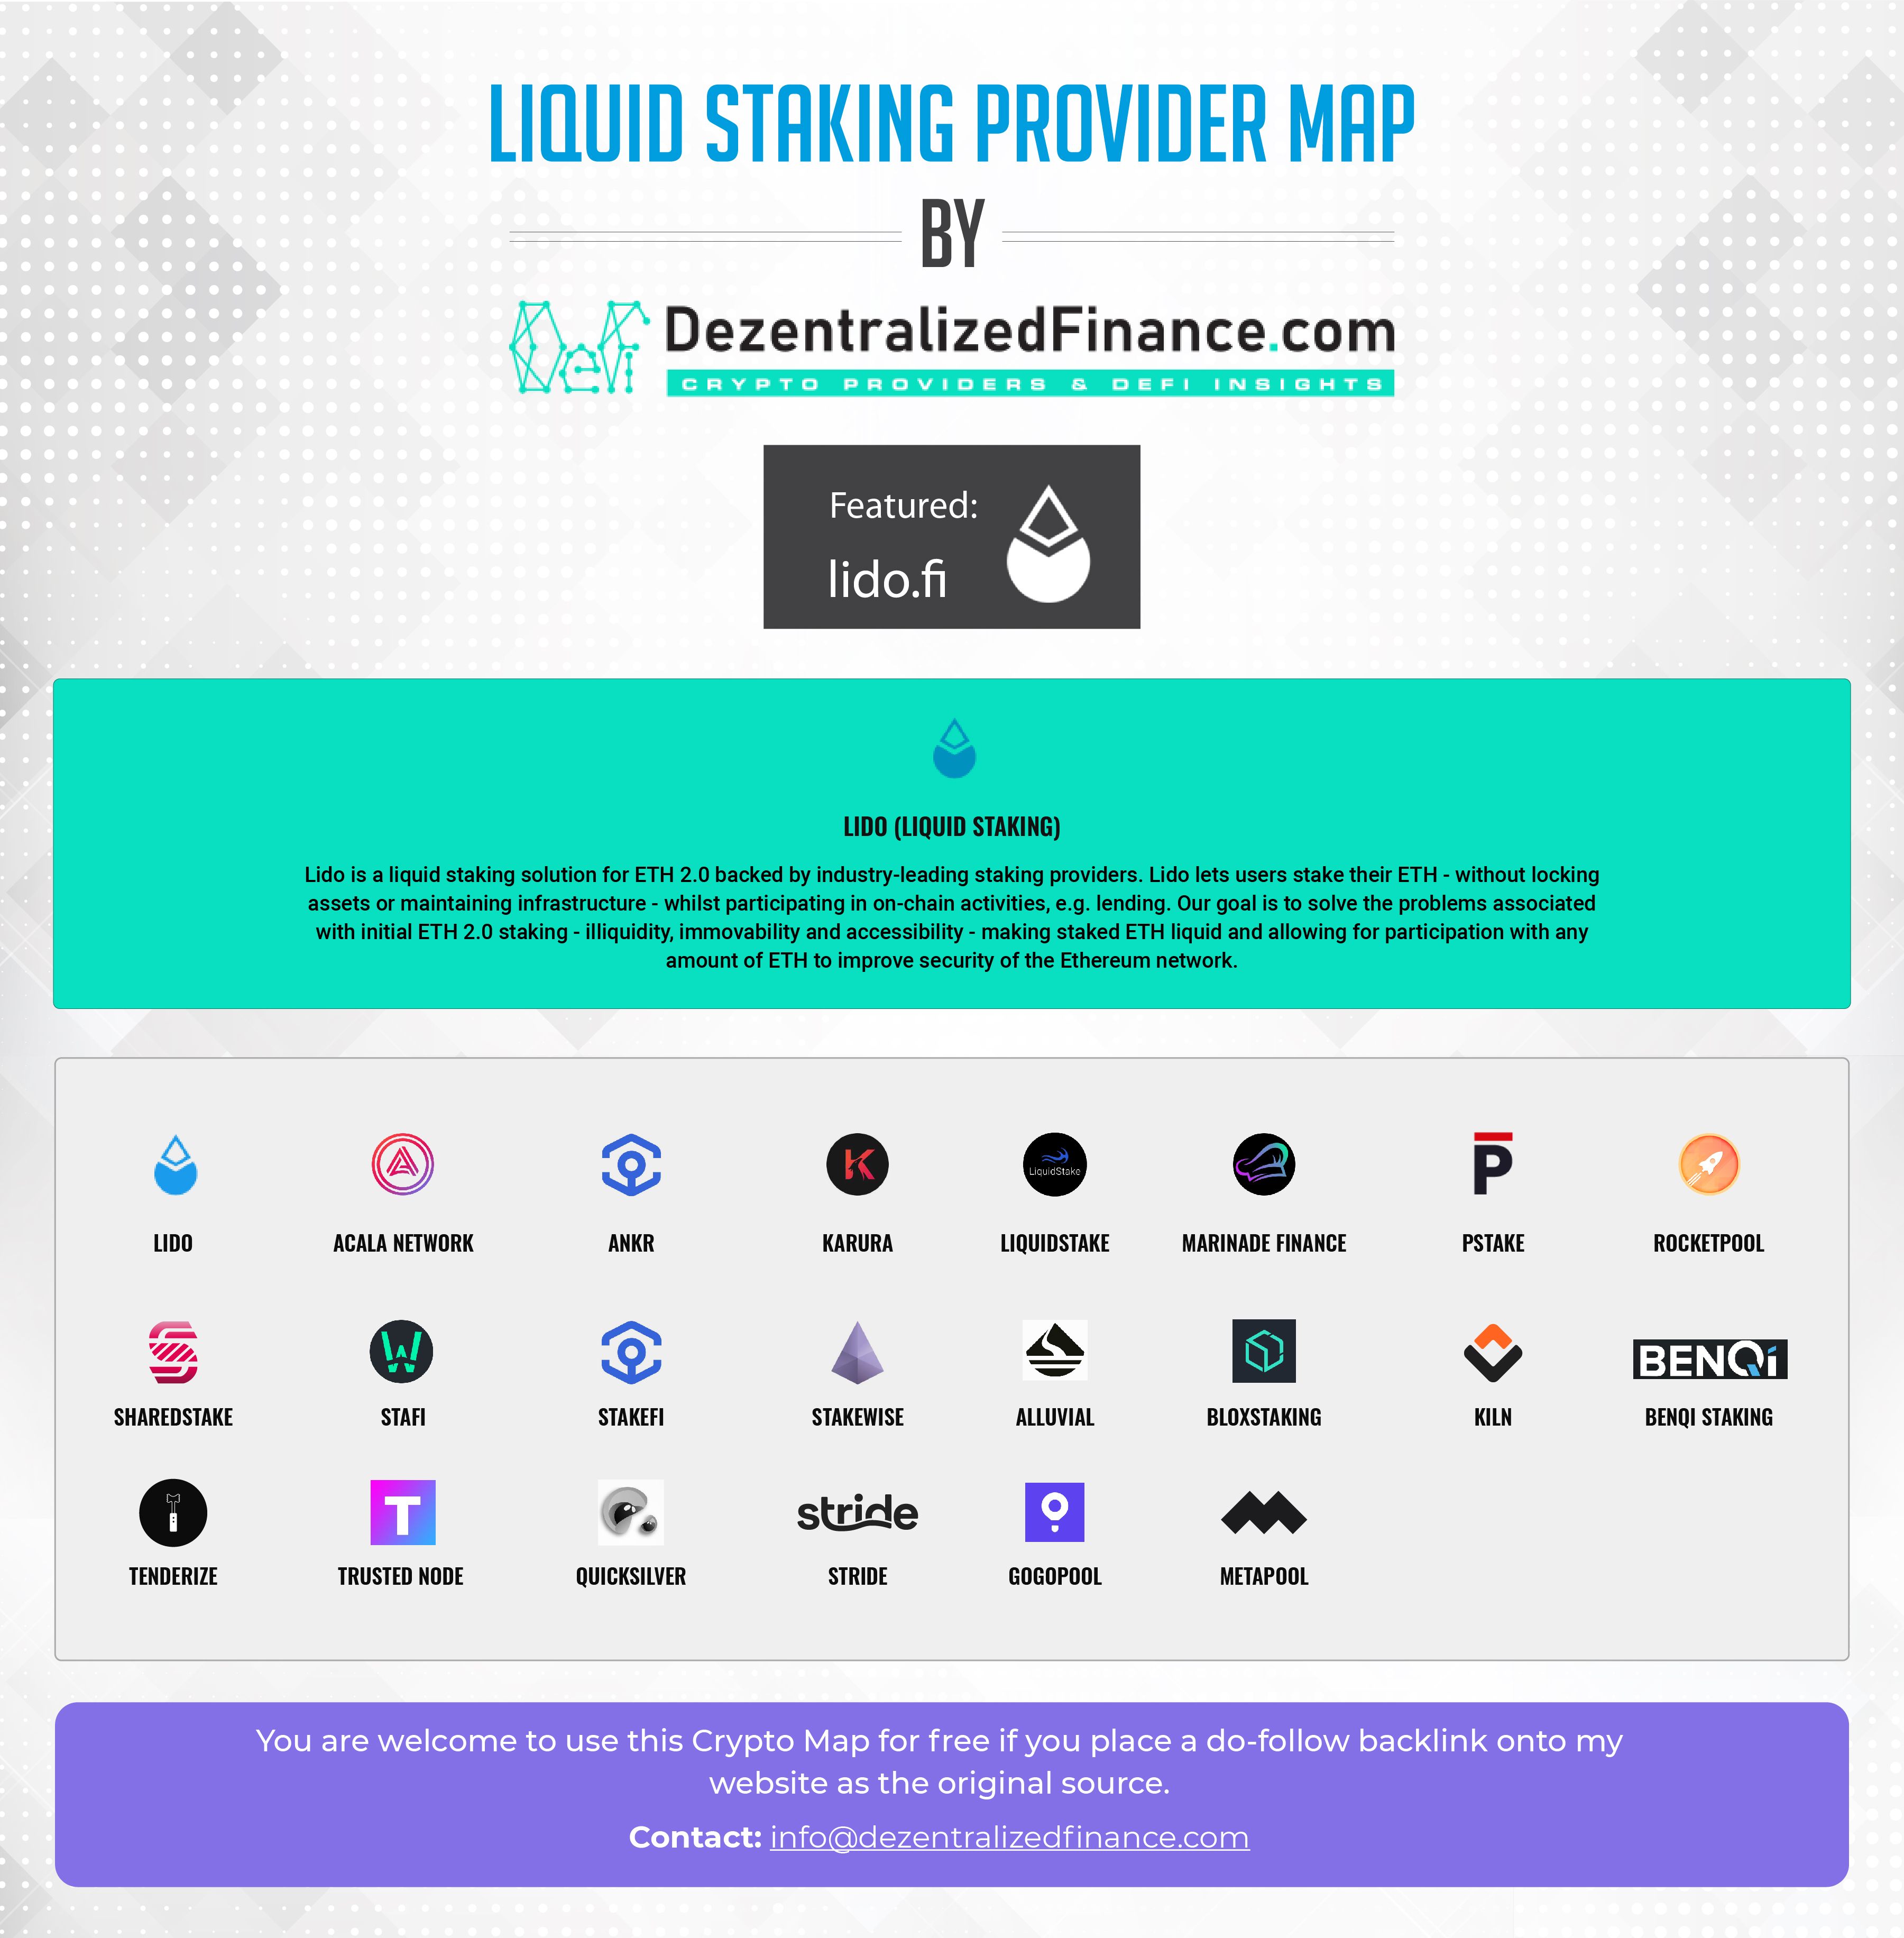 Liquid Staking Provider Map 2021 scaled